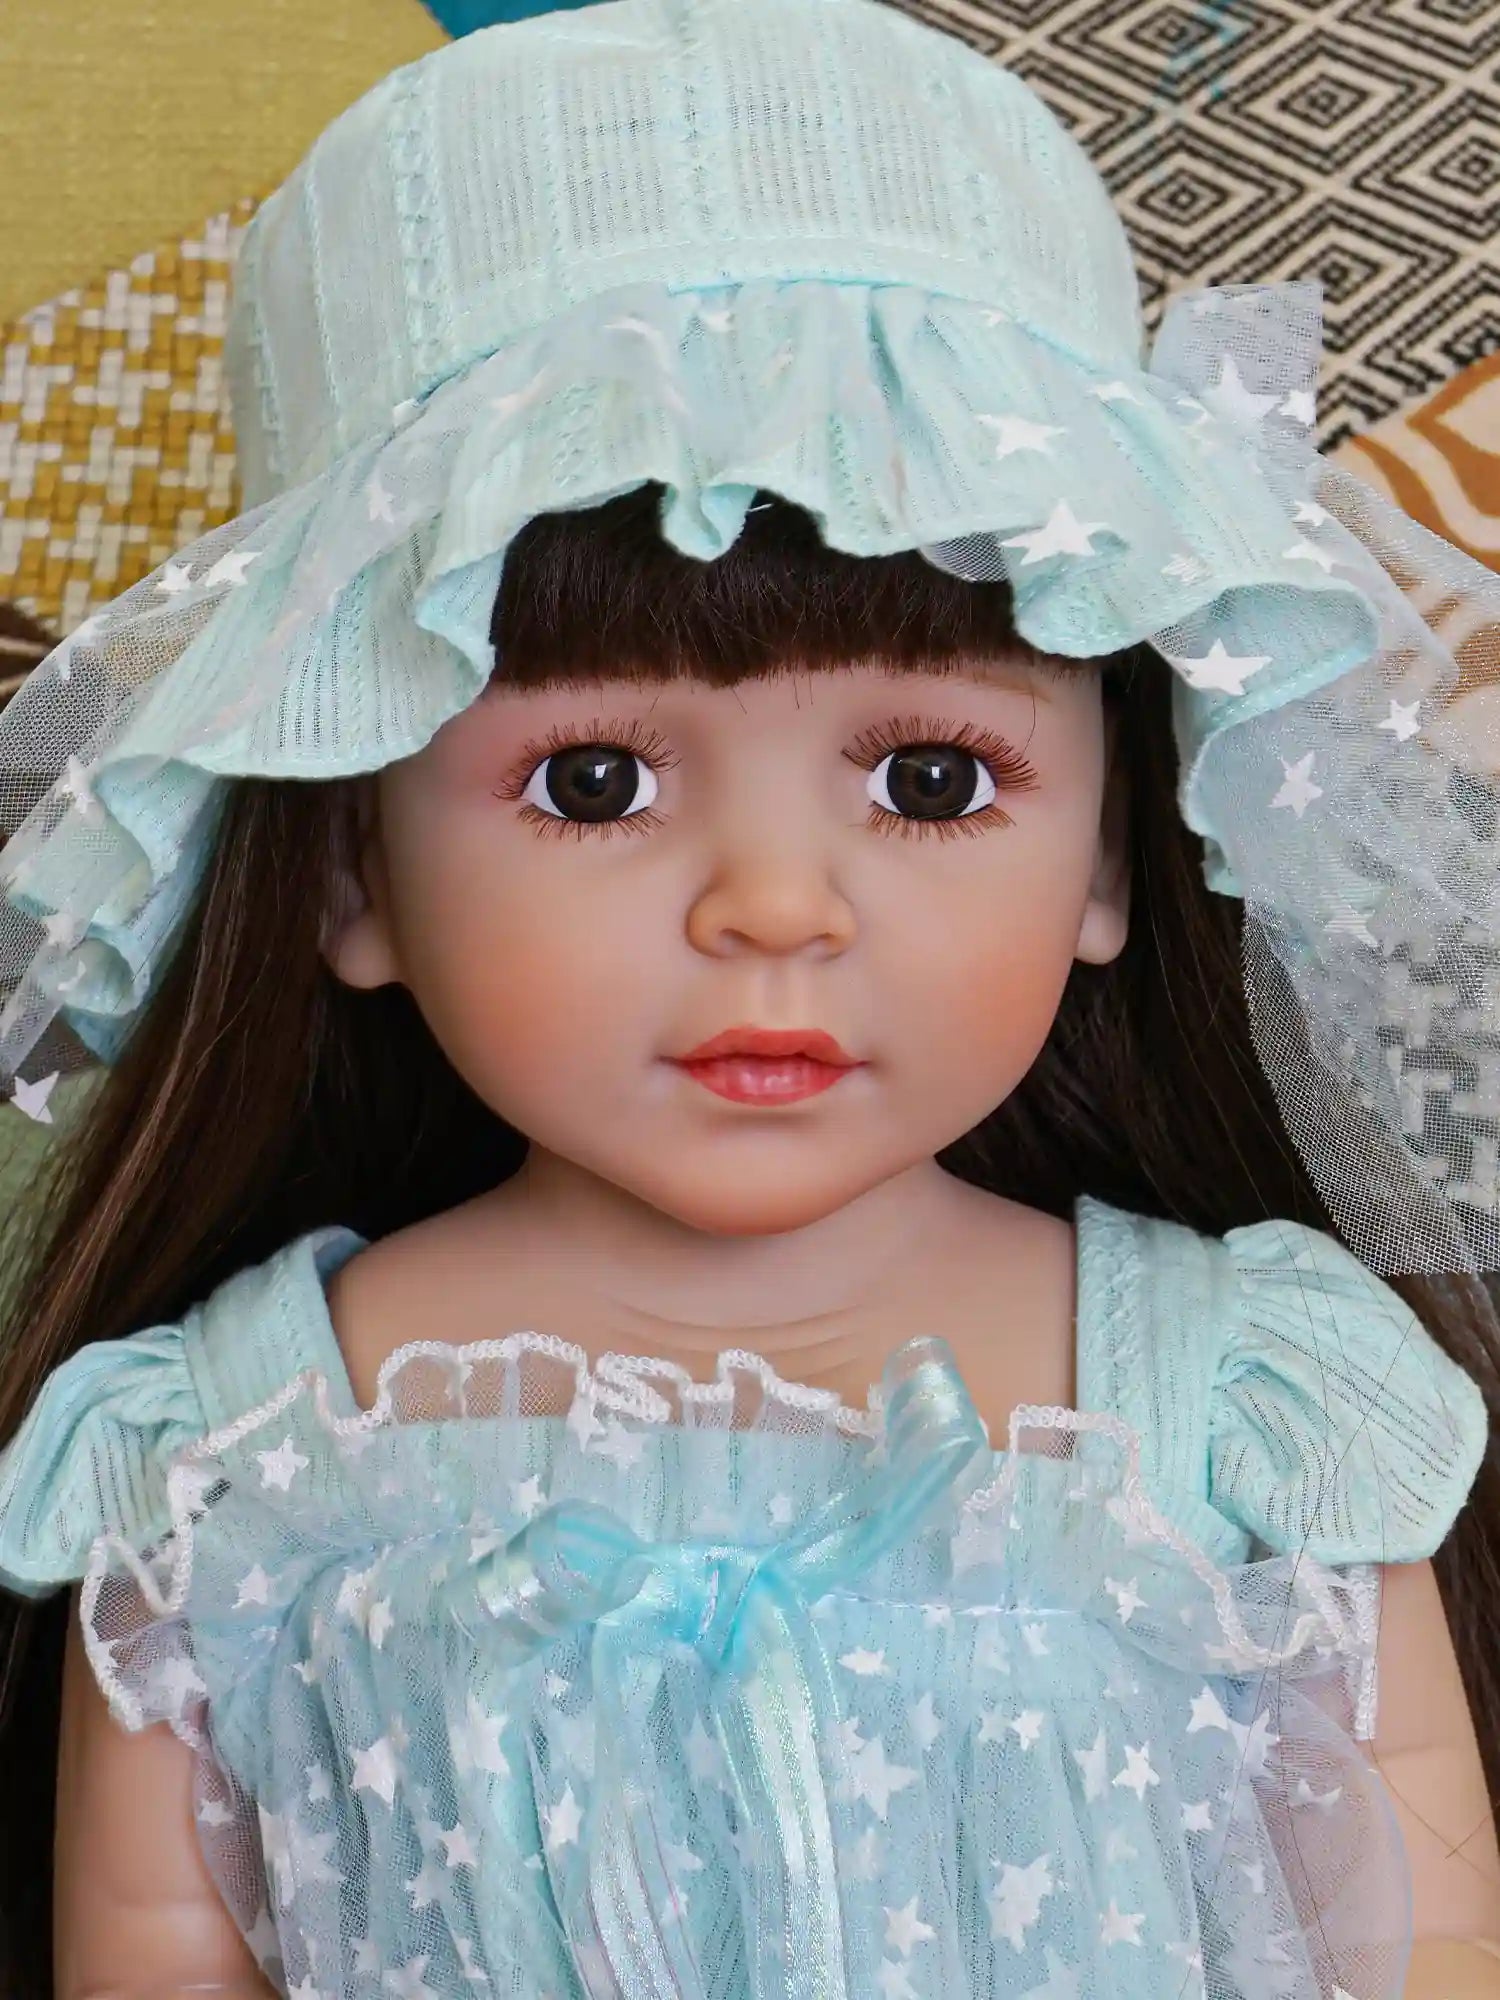 Realistic reborn doll with brown hair, in a starry aqua dress and matching leggings.